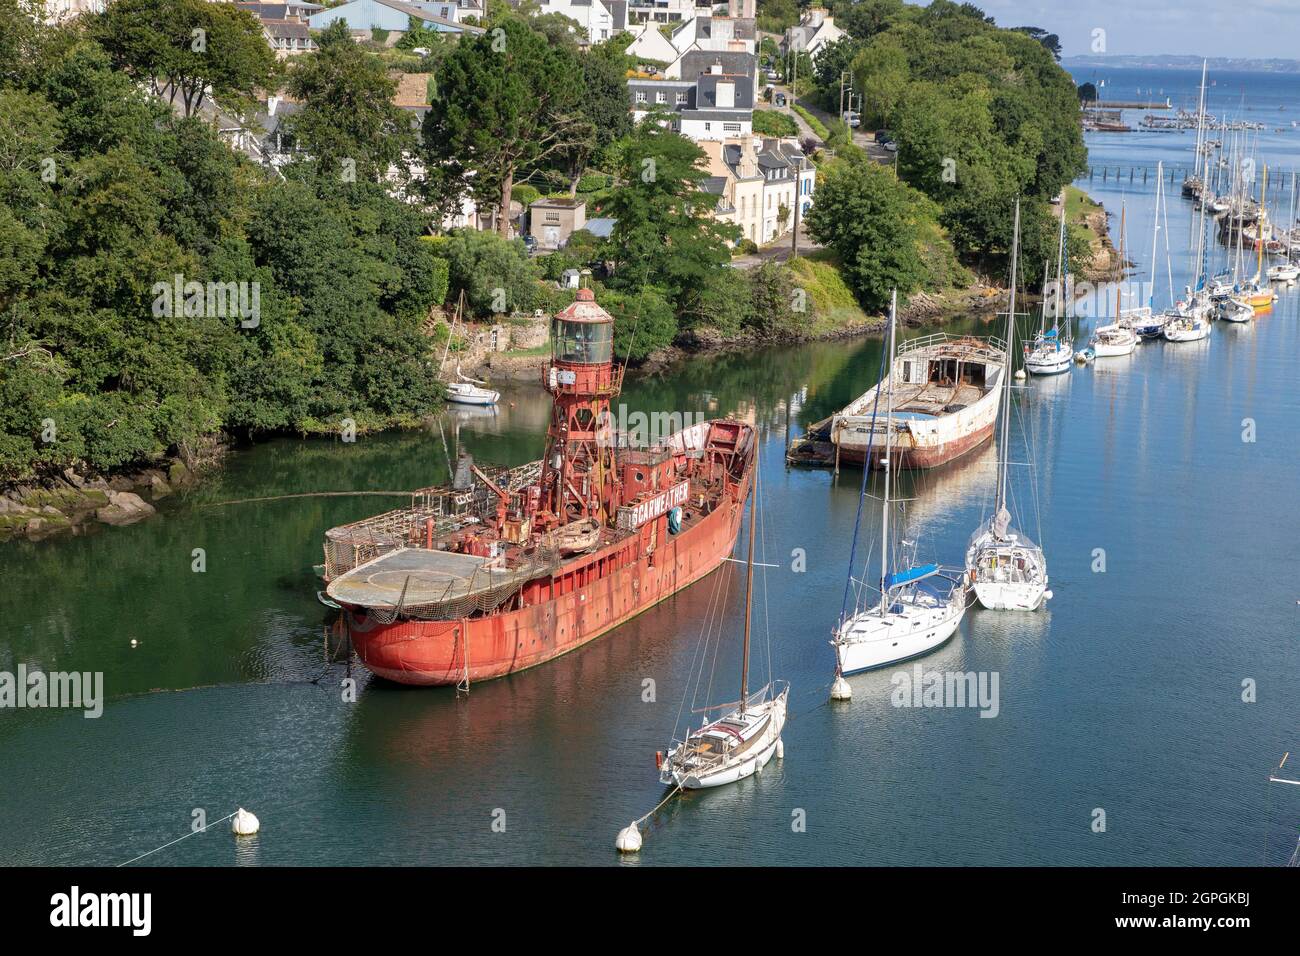 France, Finistere, Cornouaille, Douarnenez, the docks of Port Rhu with ships in the harbour museum Stock Photo